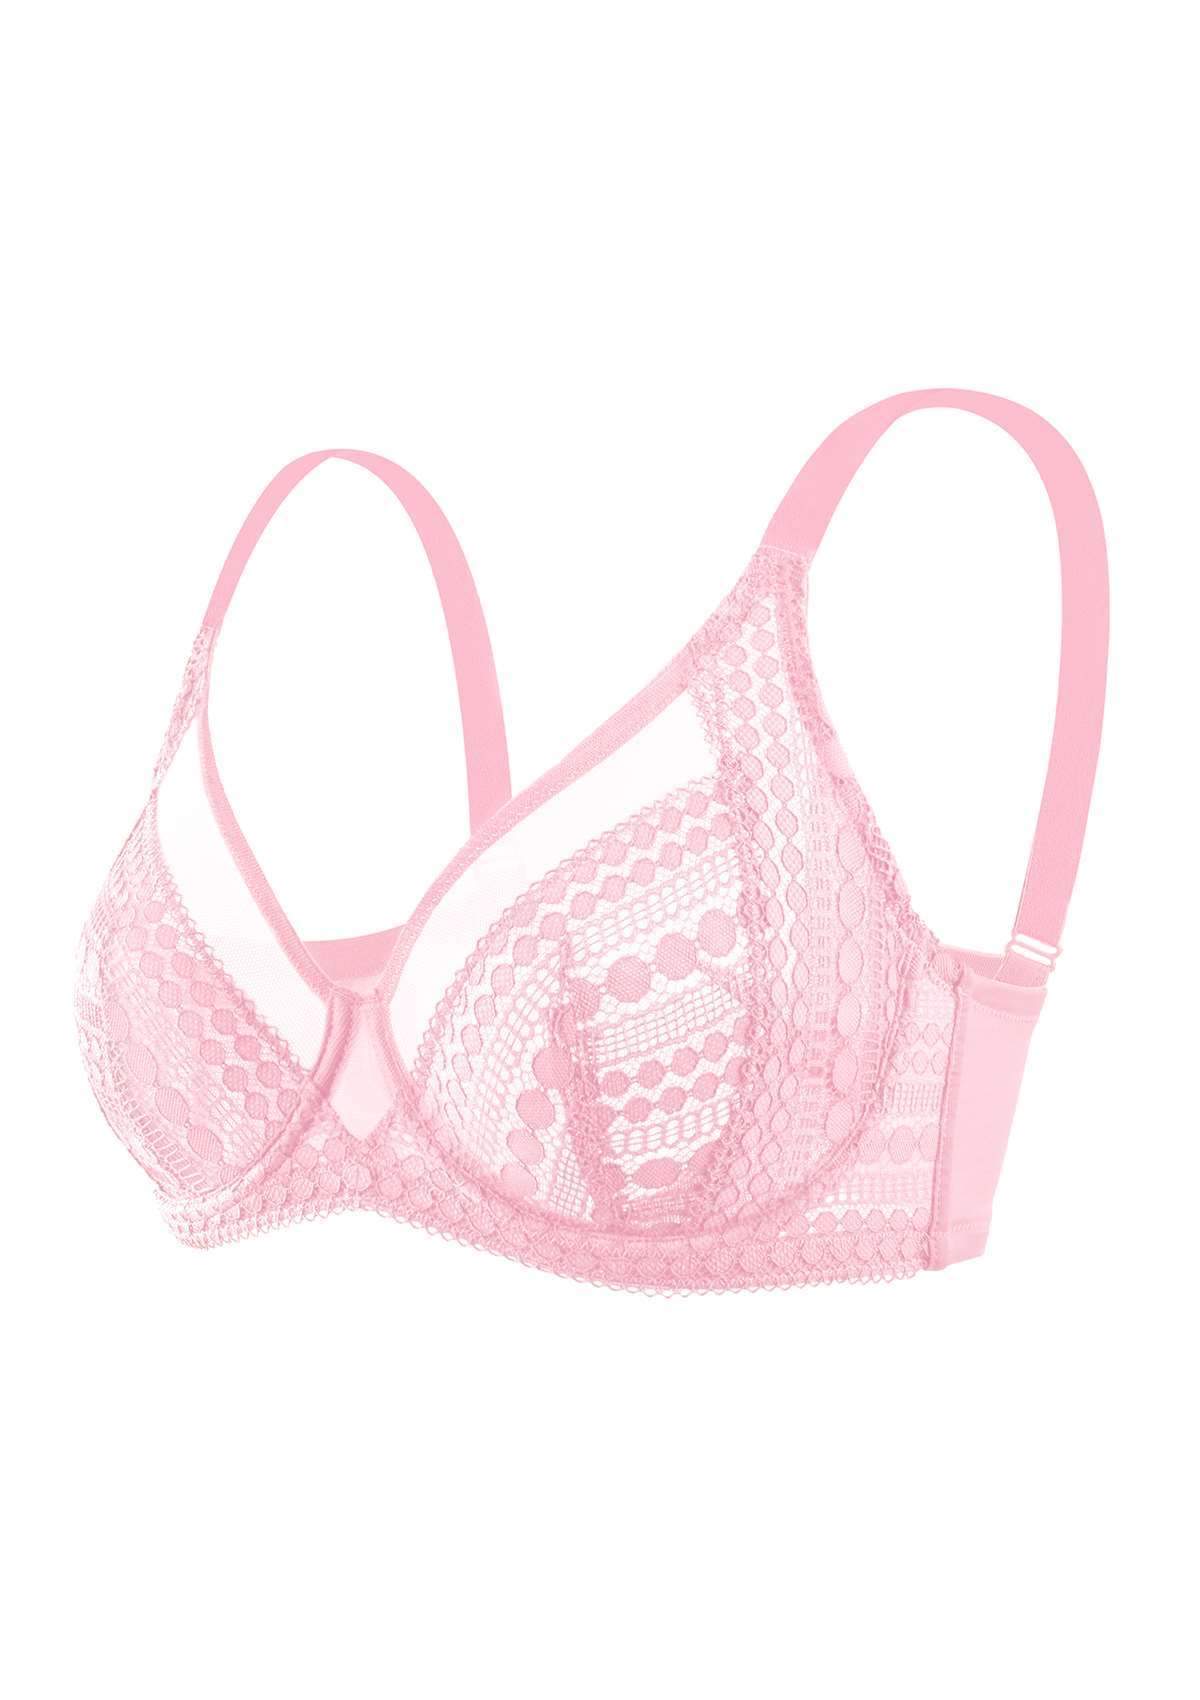 HSIA Heroine Lace Bra And Panties Set: Most Comfortable Supportive Bra - Pink / 38 / D